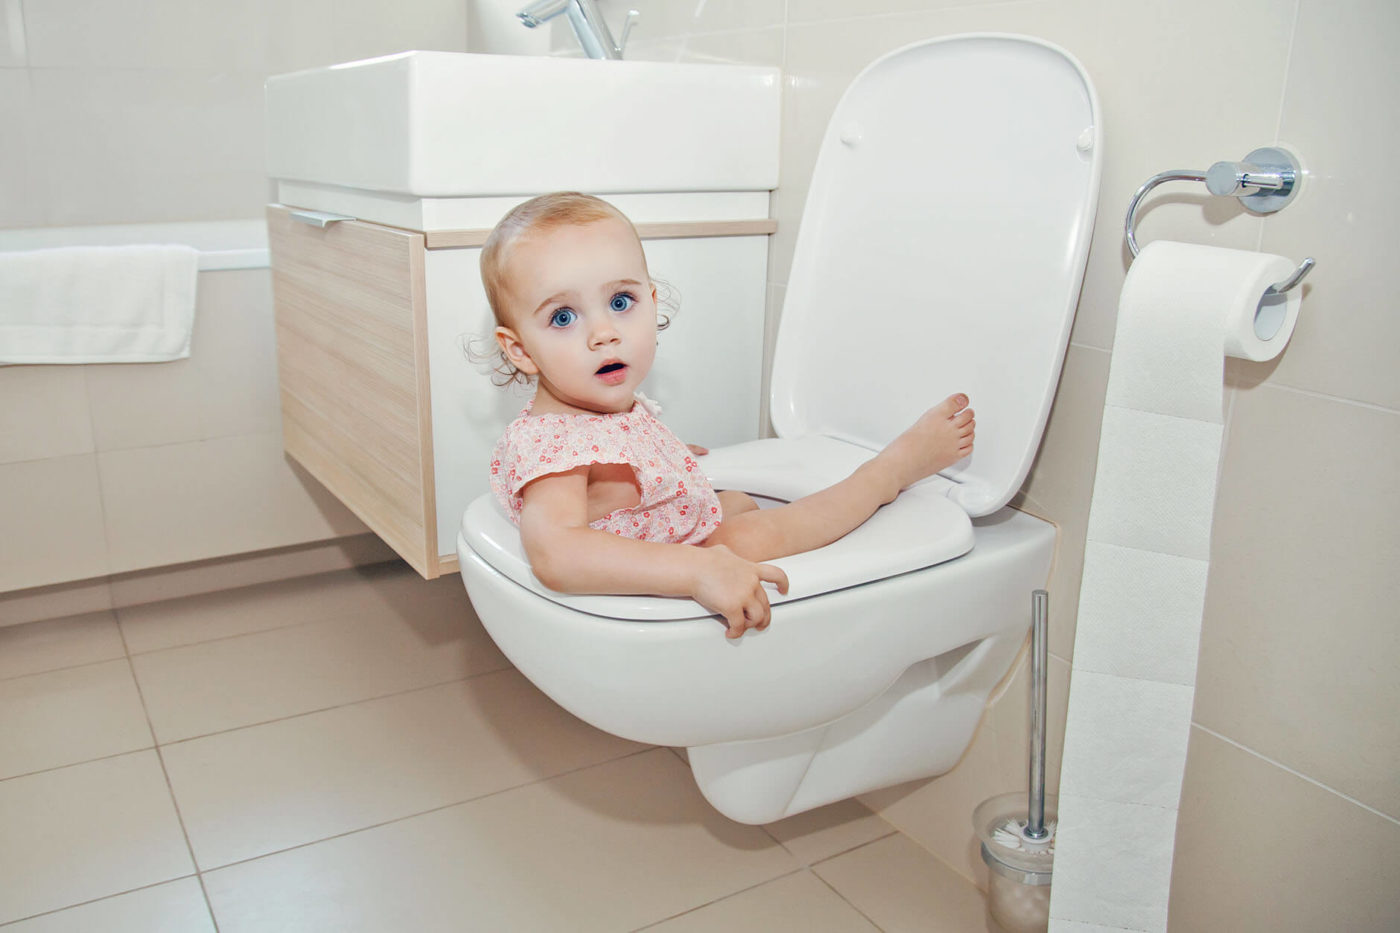 A baby that has fallen in the toilet looking at the camera